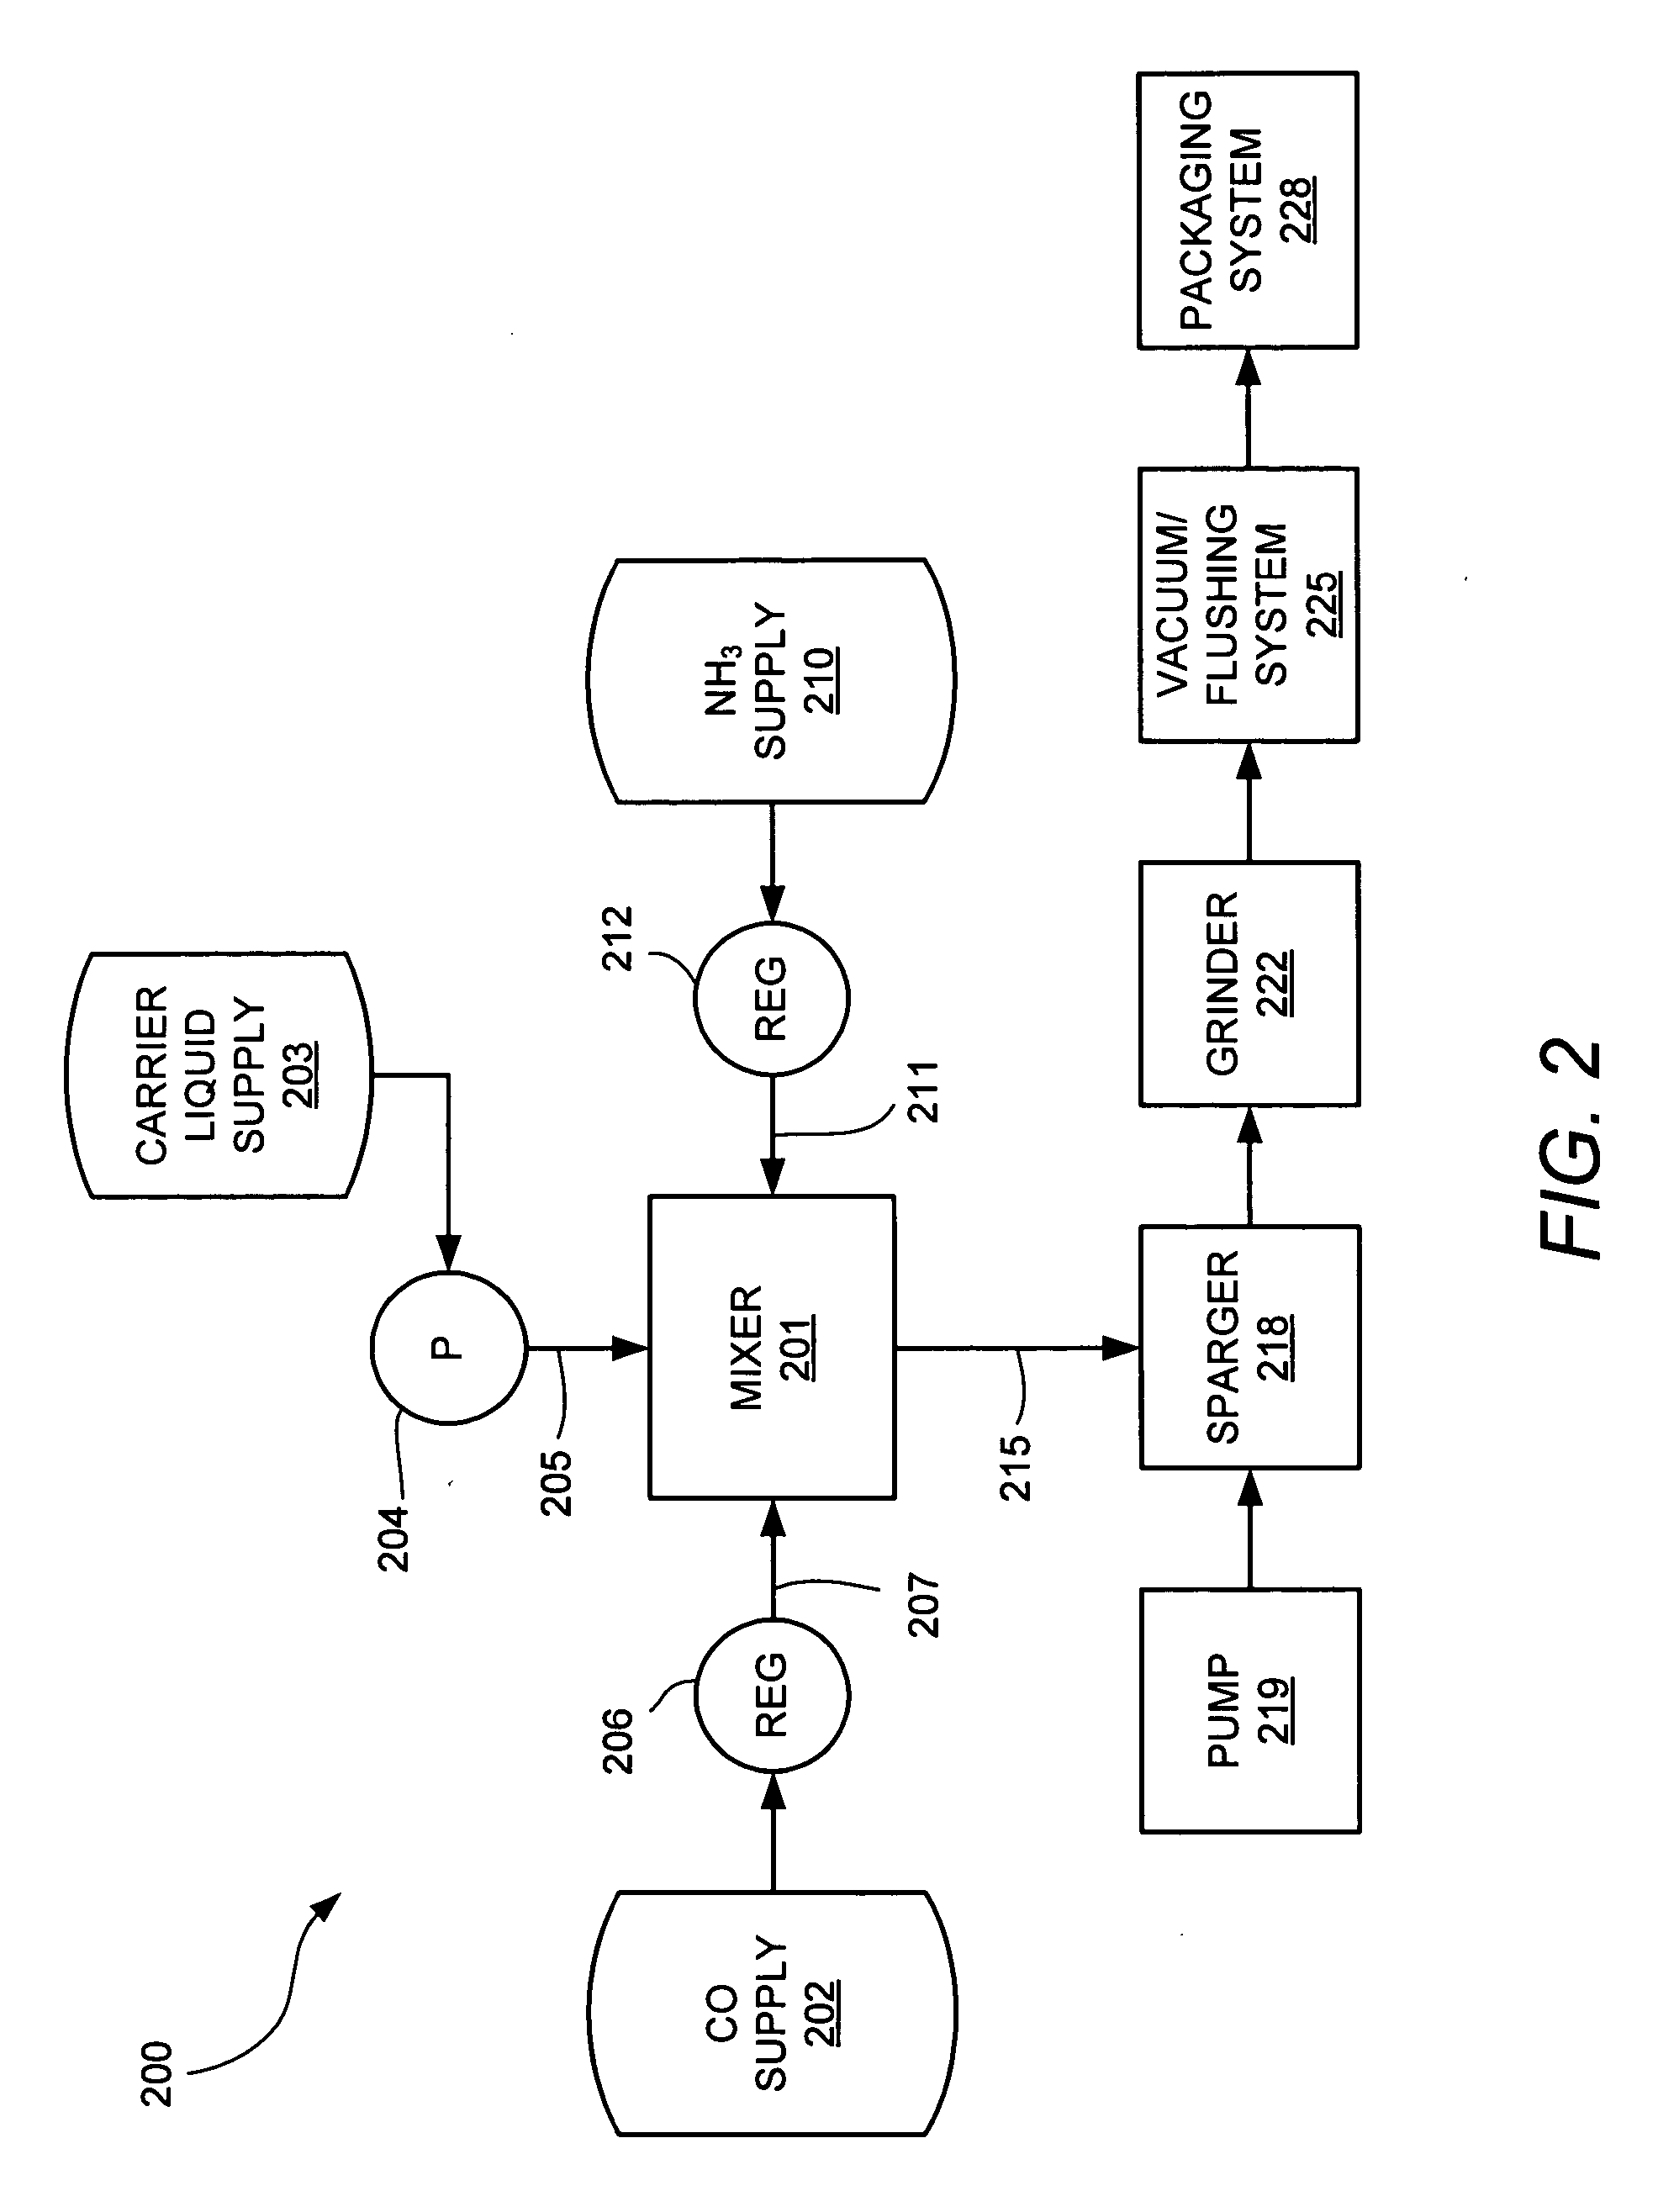 Method for applying carbon monoxide to meat products